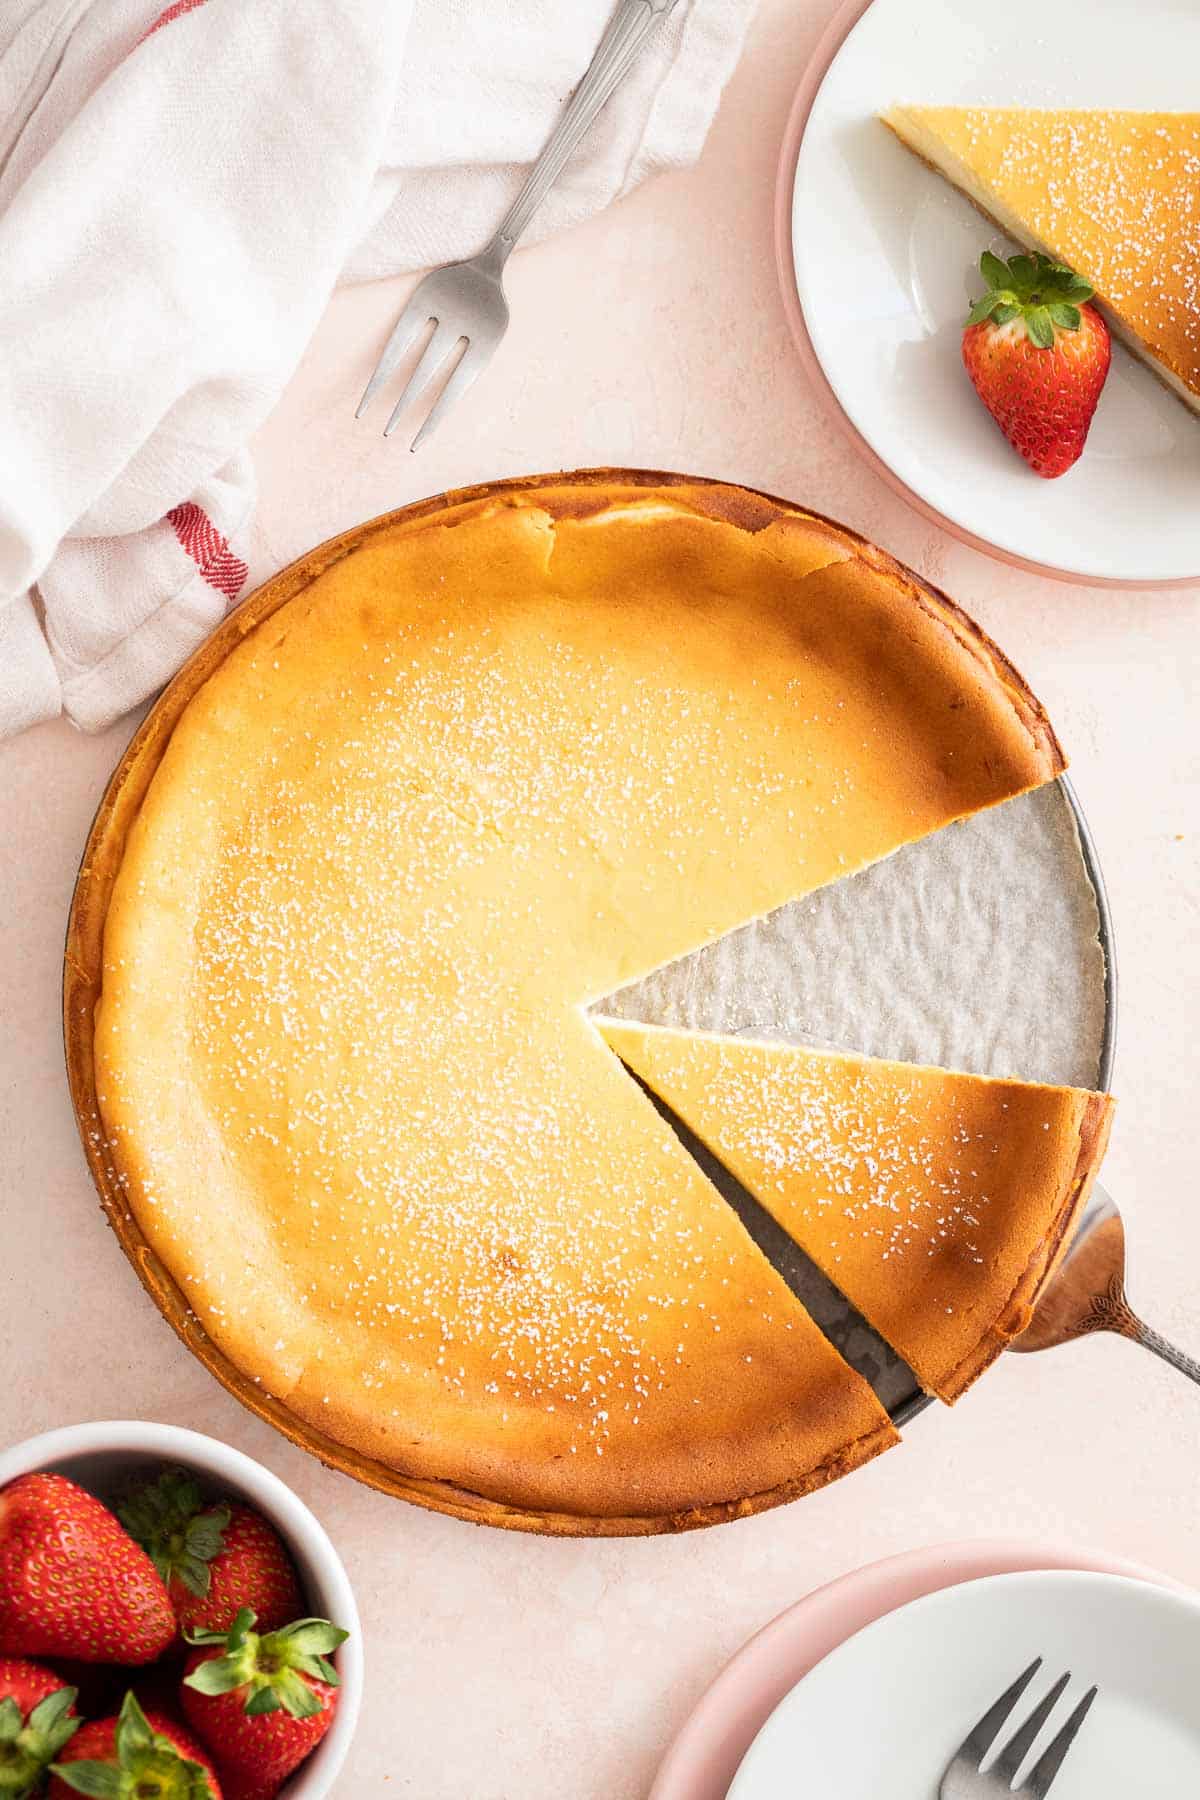 A German Cheesecake on a light pink surface next to strawberries and plates.